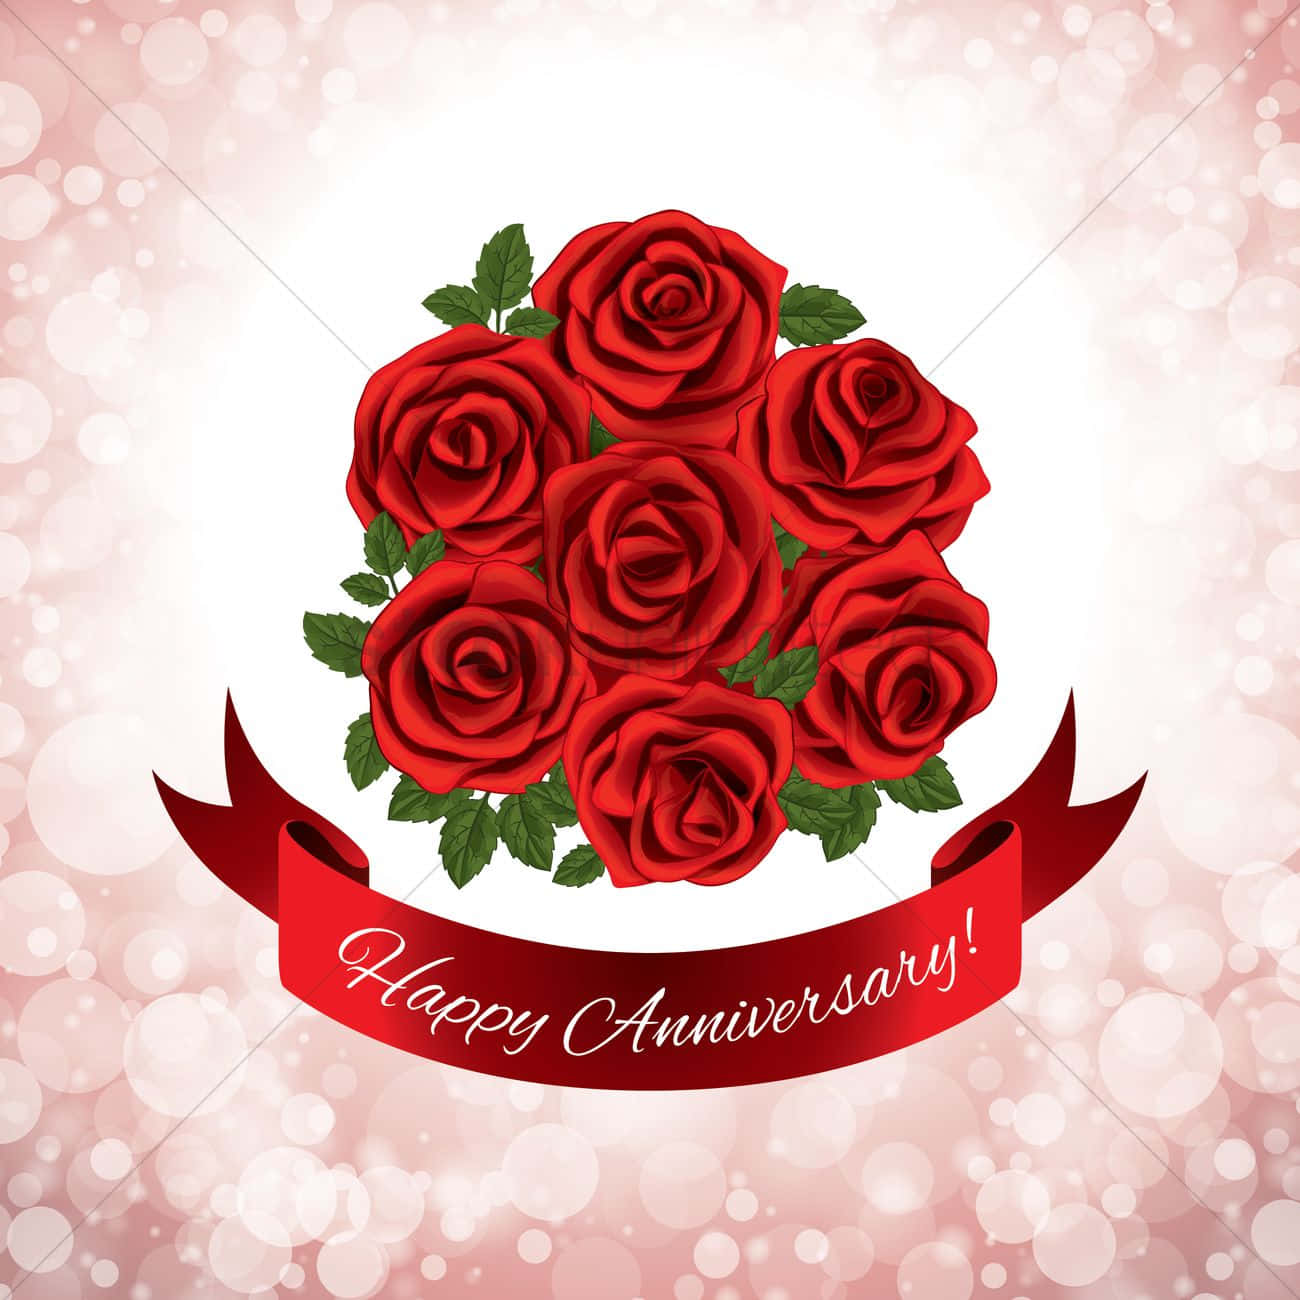 Anniversary Bouquet Of Red Roses